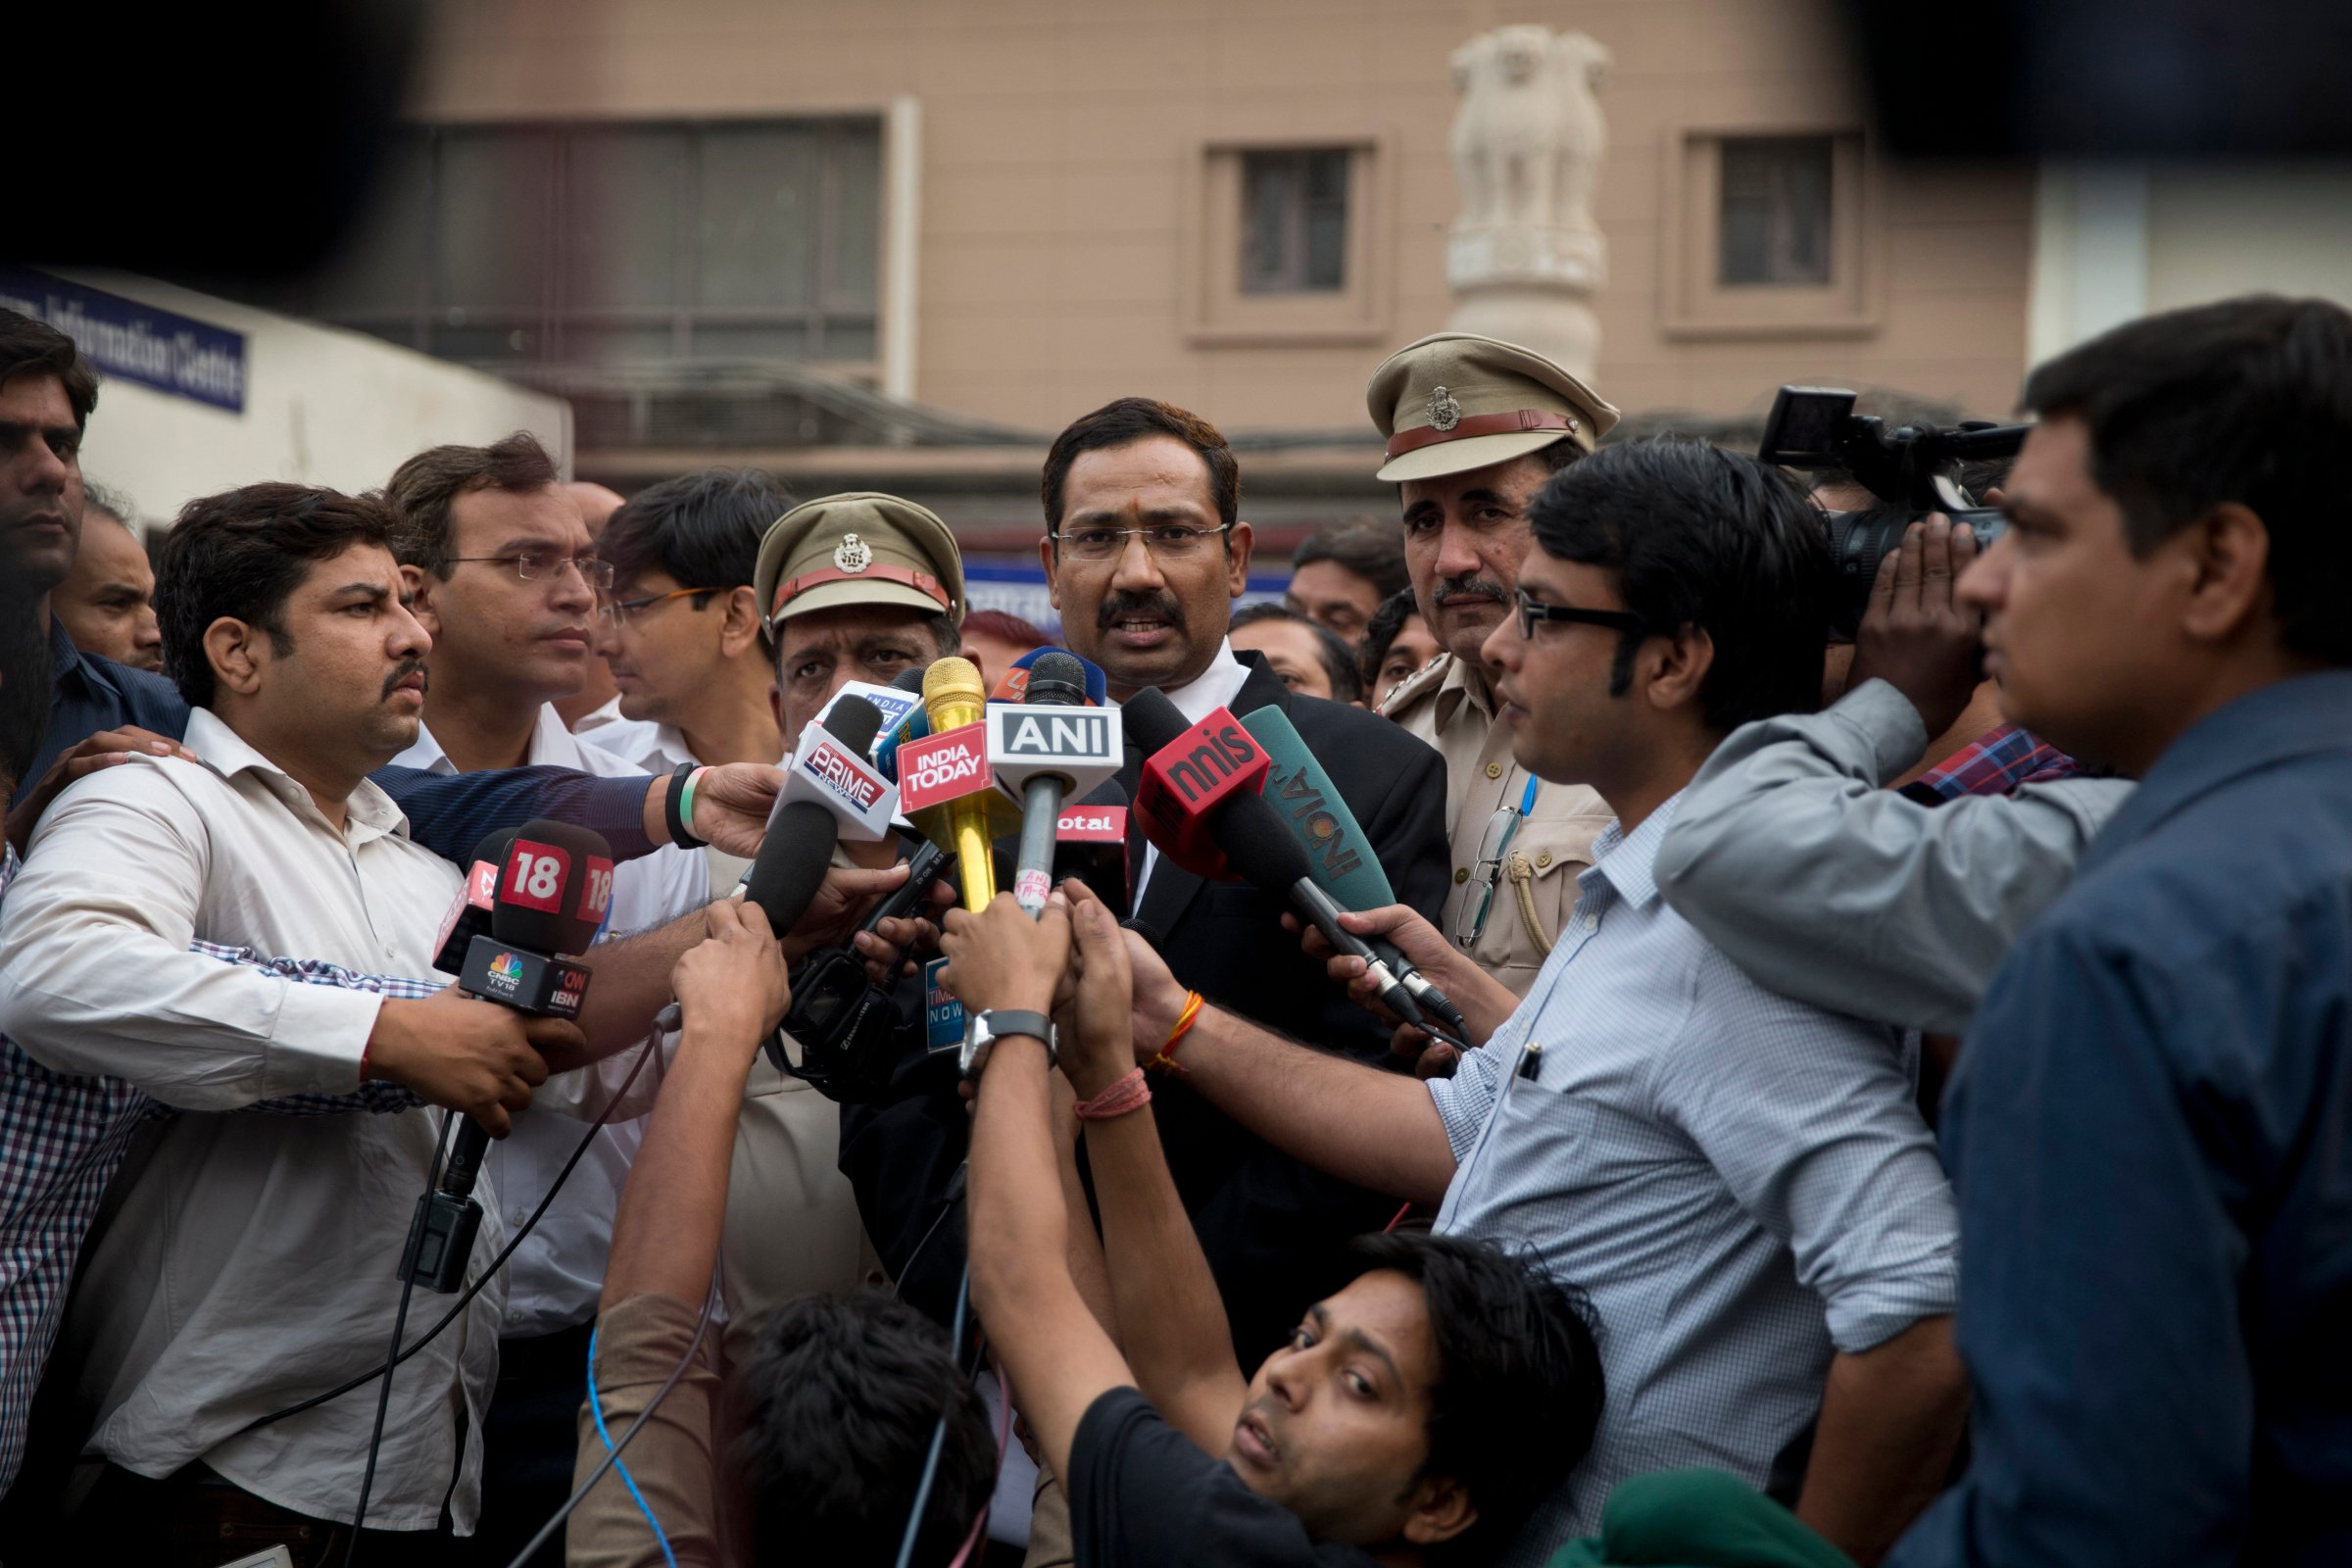 A lawyer, center, speaks to reporters at the Tis Hazari Courts premises, after a court sentence for Uber driver Shiv Kumar Yadav in New Delhi on Tuesday, Nov. 3, 2015. An Indian court sentenced Uber driver Yadav to life in prison Tuesday for raping a passenger in his vehicle last December.